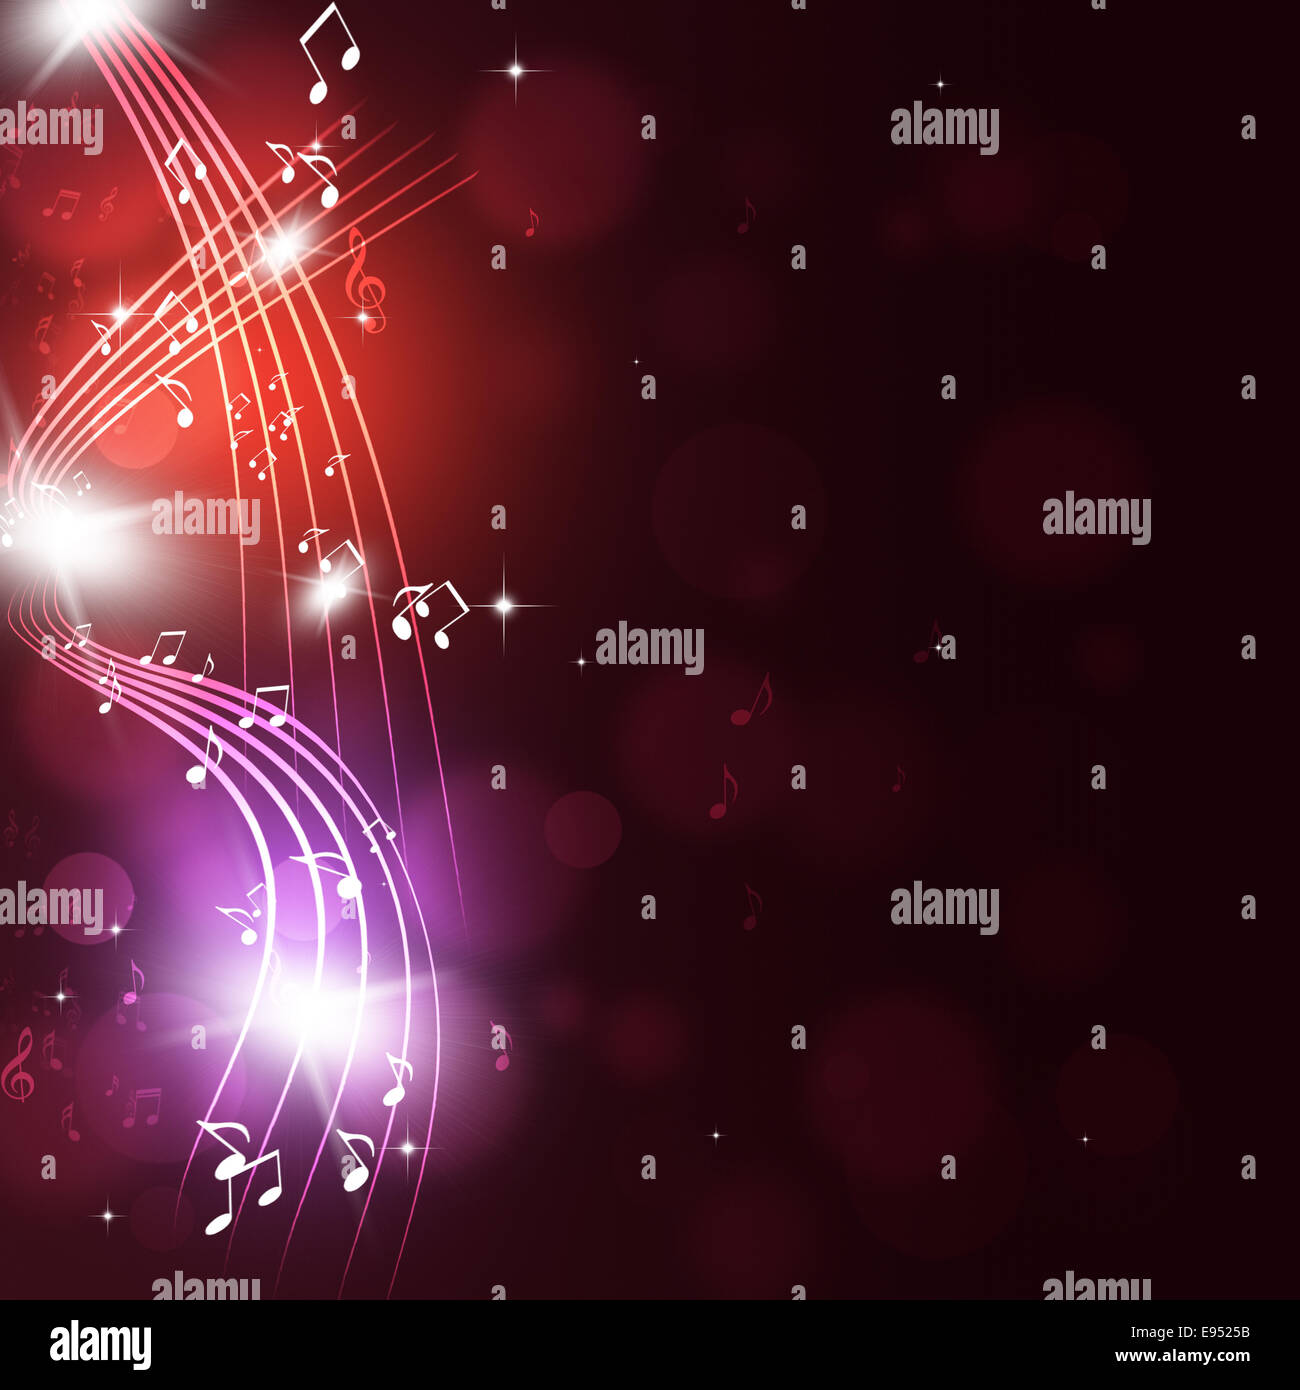 abtract music notes multicolor background for party events Stock Photo